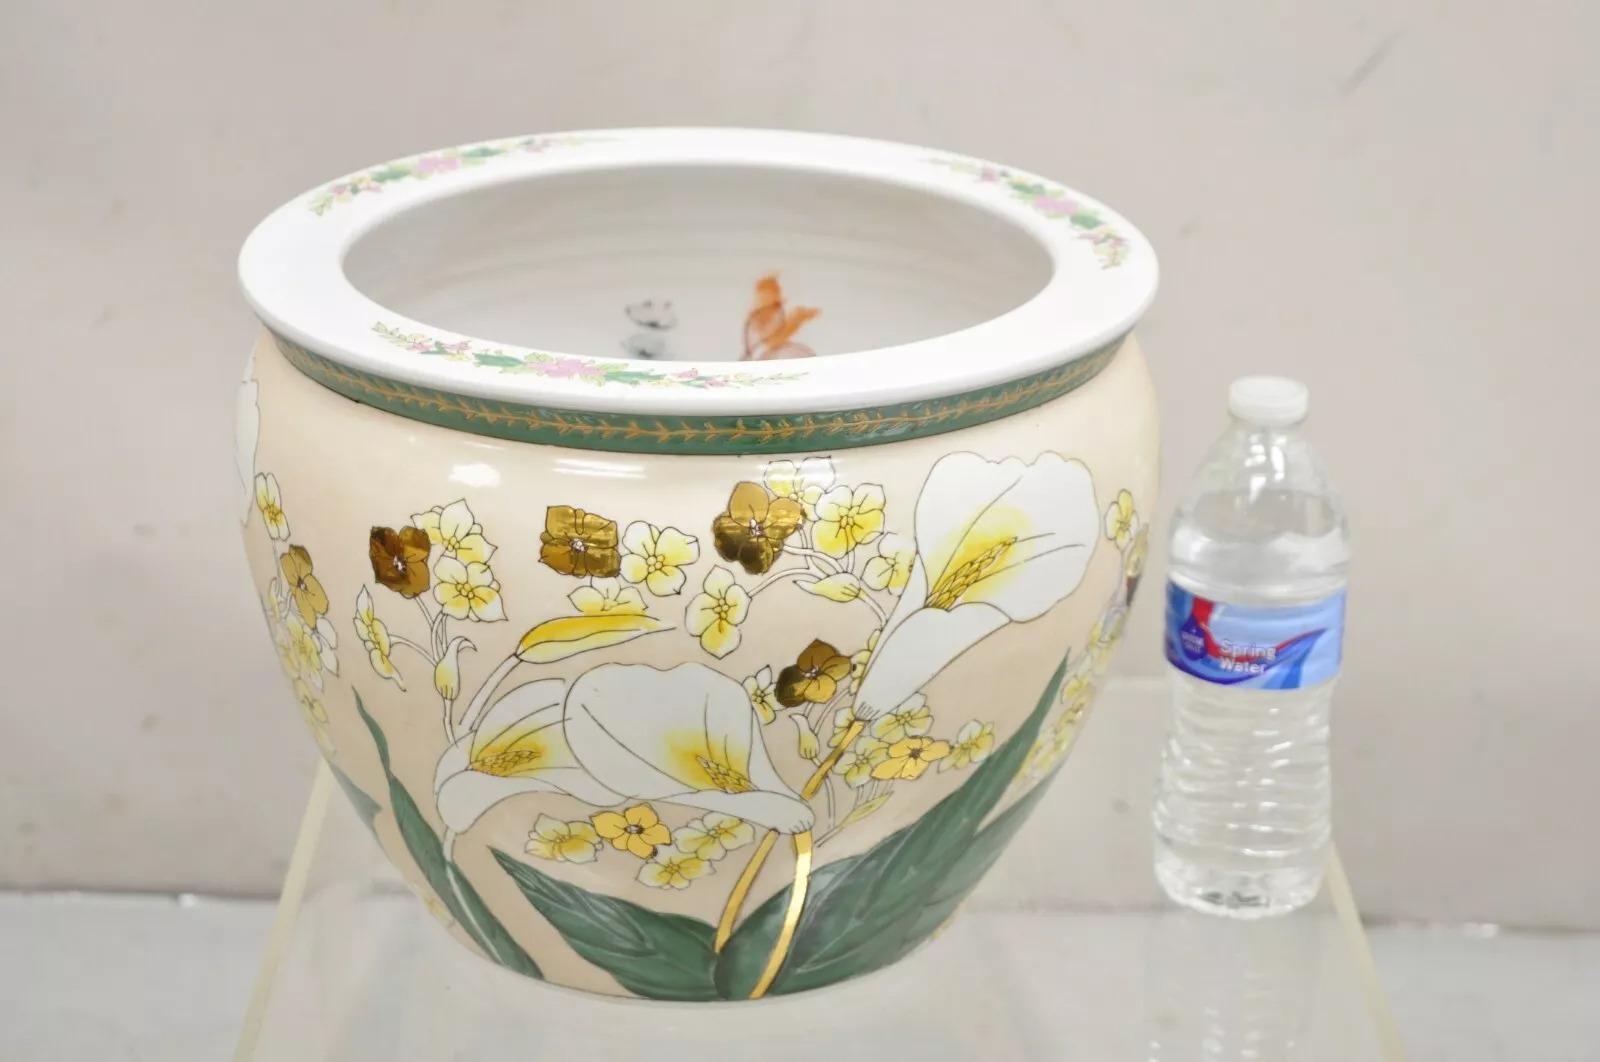 Vintage Chinese Ceramic Jardiniere Cachepot Planter Pot with Fish & Lilies. Circa Late 20th Century. Measurements: 10